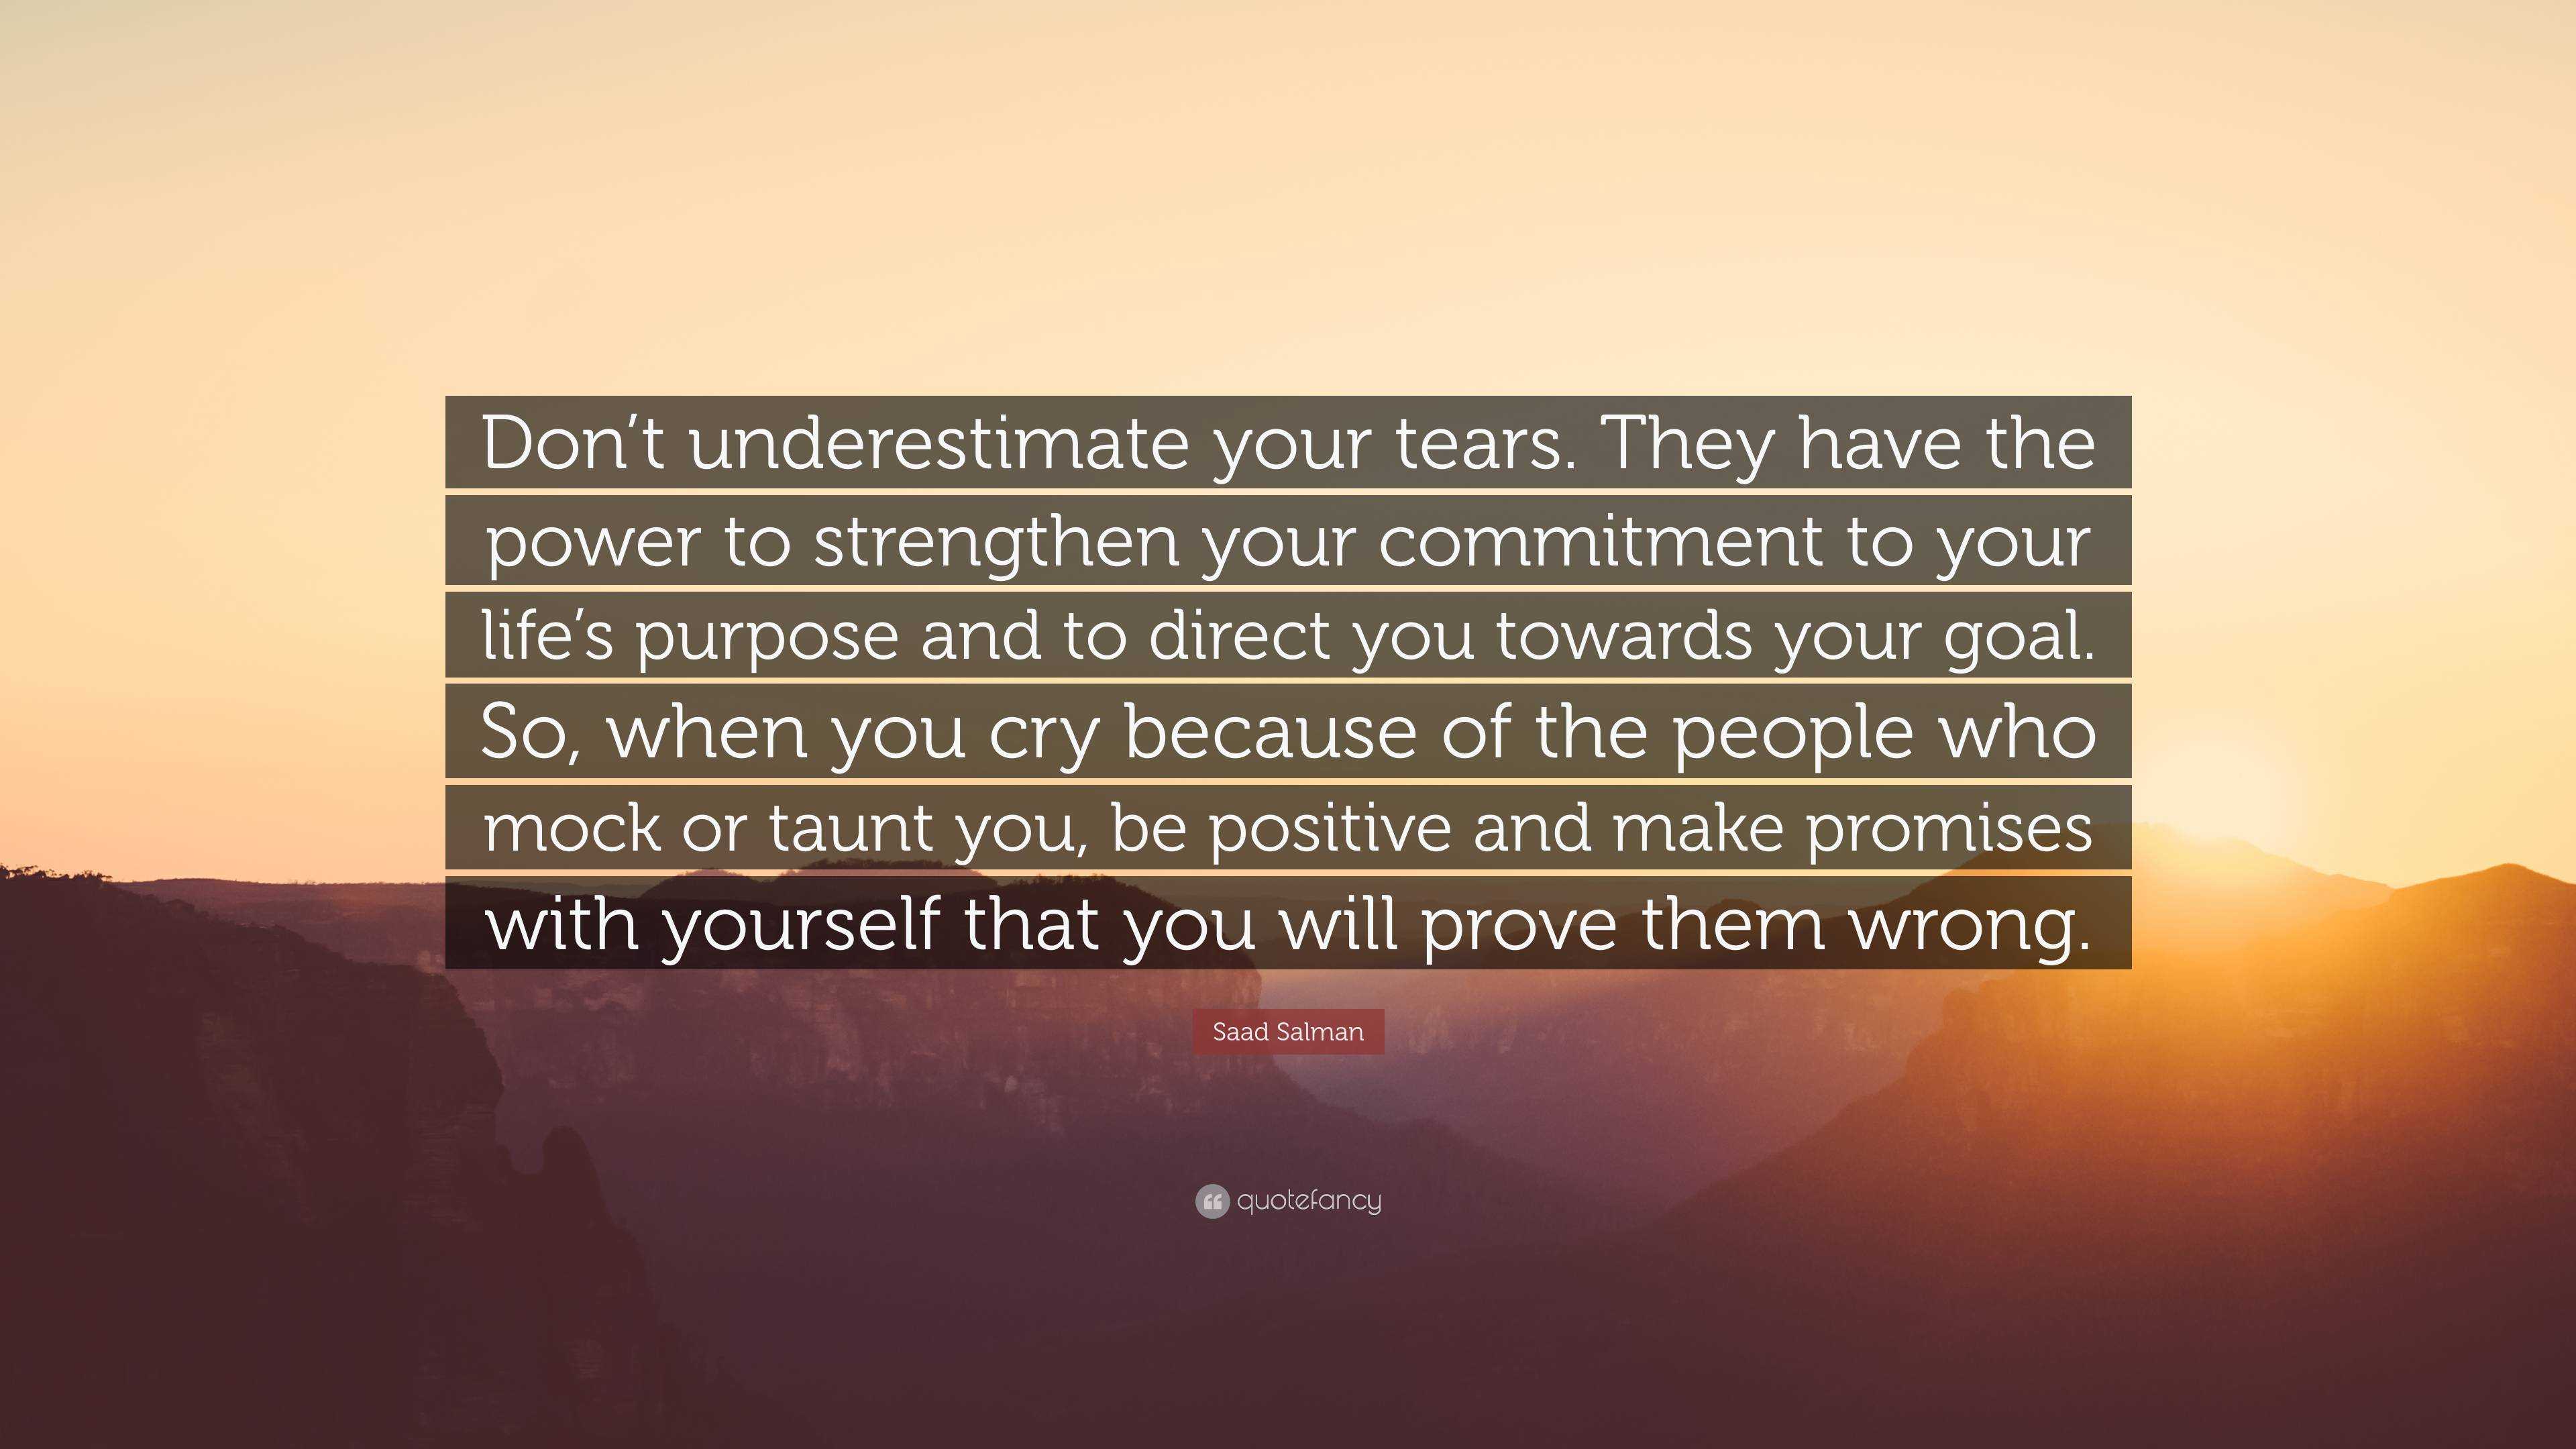 The Power of Tears